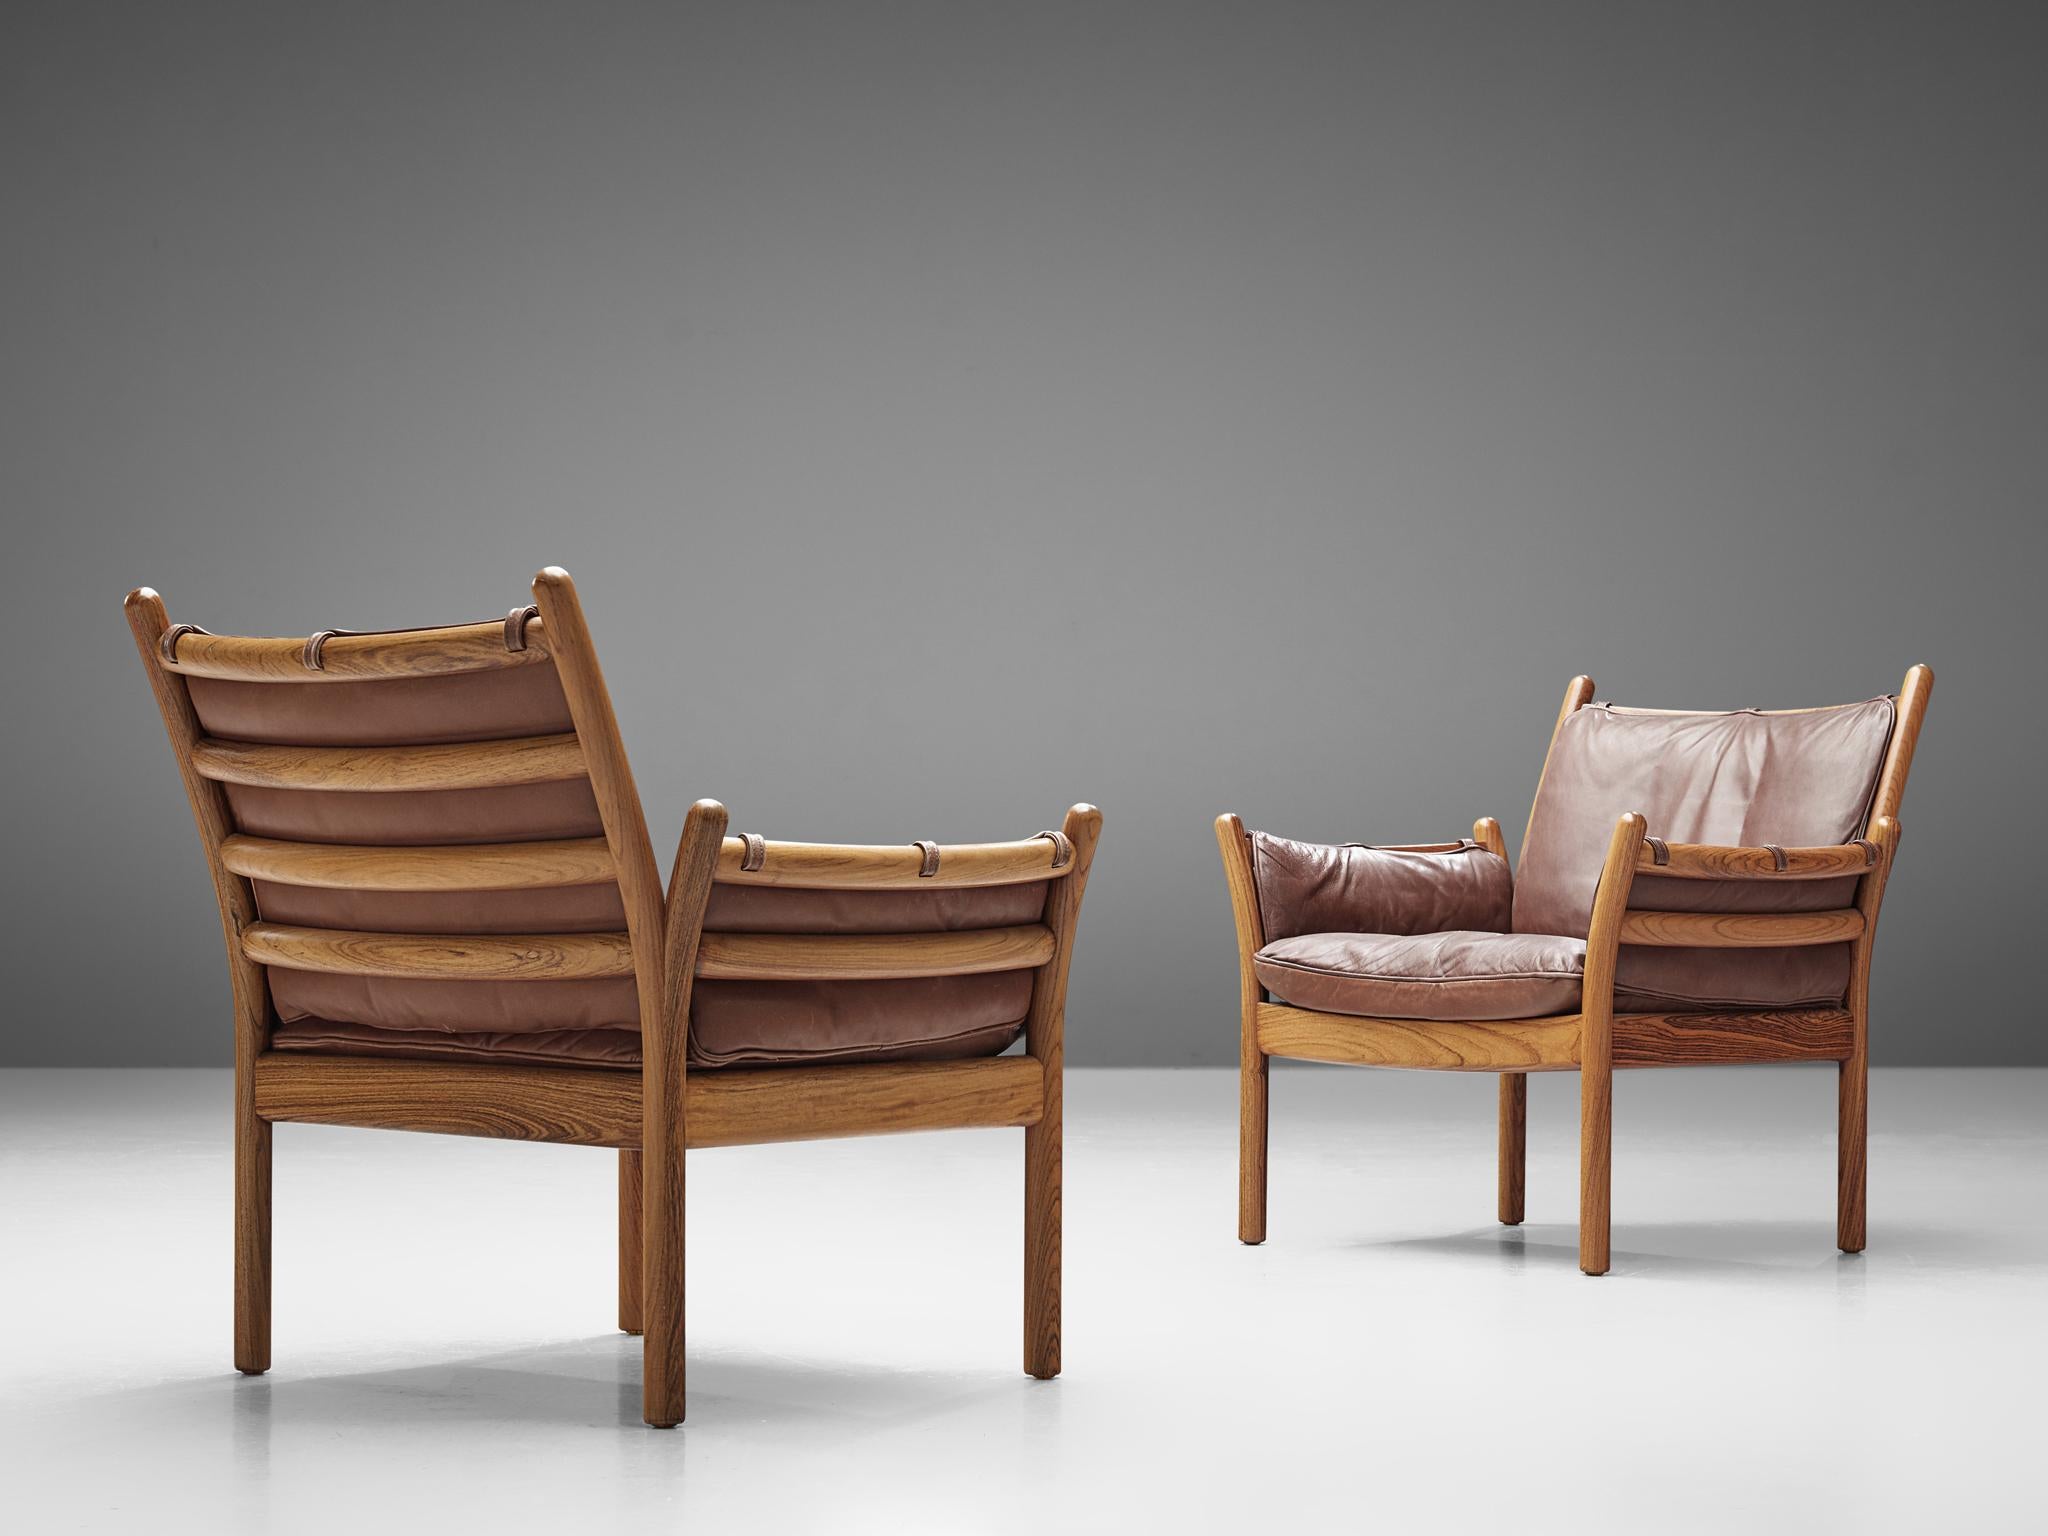 Illum Wikkelsø by CFC Silkeborg, 'Genius' chairs, leather and rosewood, Denmark, 1950s.

This chair is made out of solid rosewood and features a cognac leather cushion on both seat and back. The chair is created as a sort of slatted rosewood